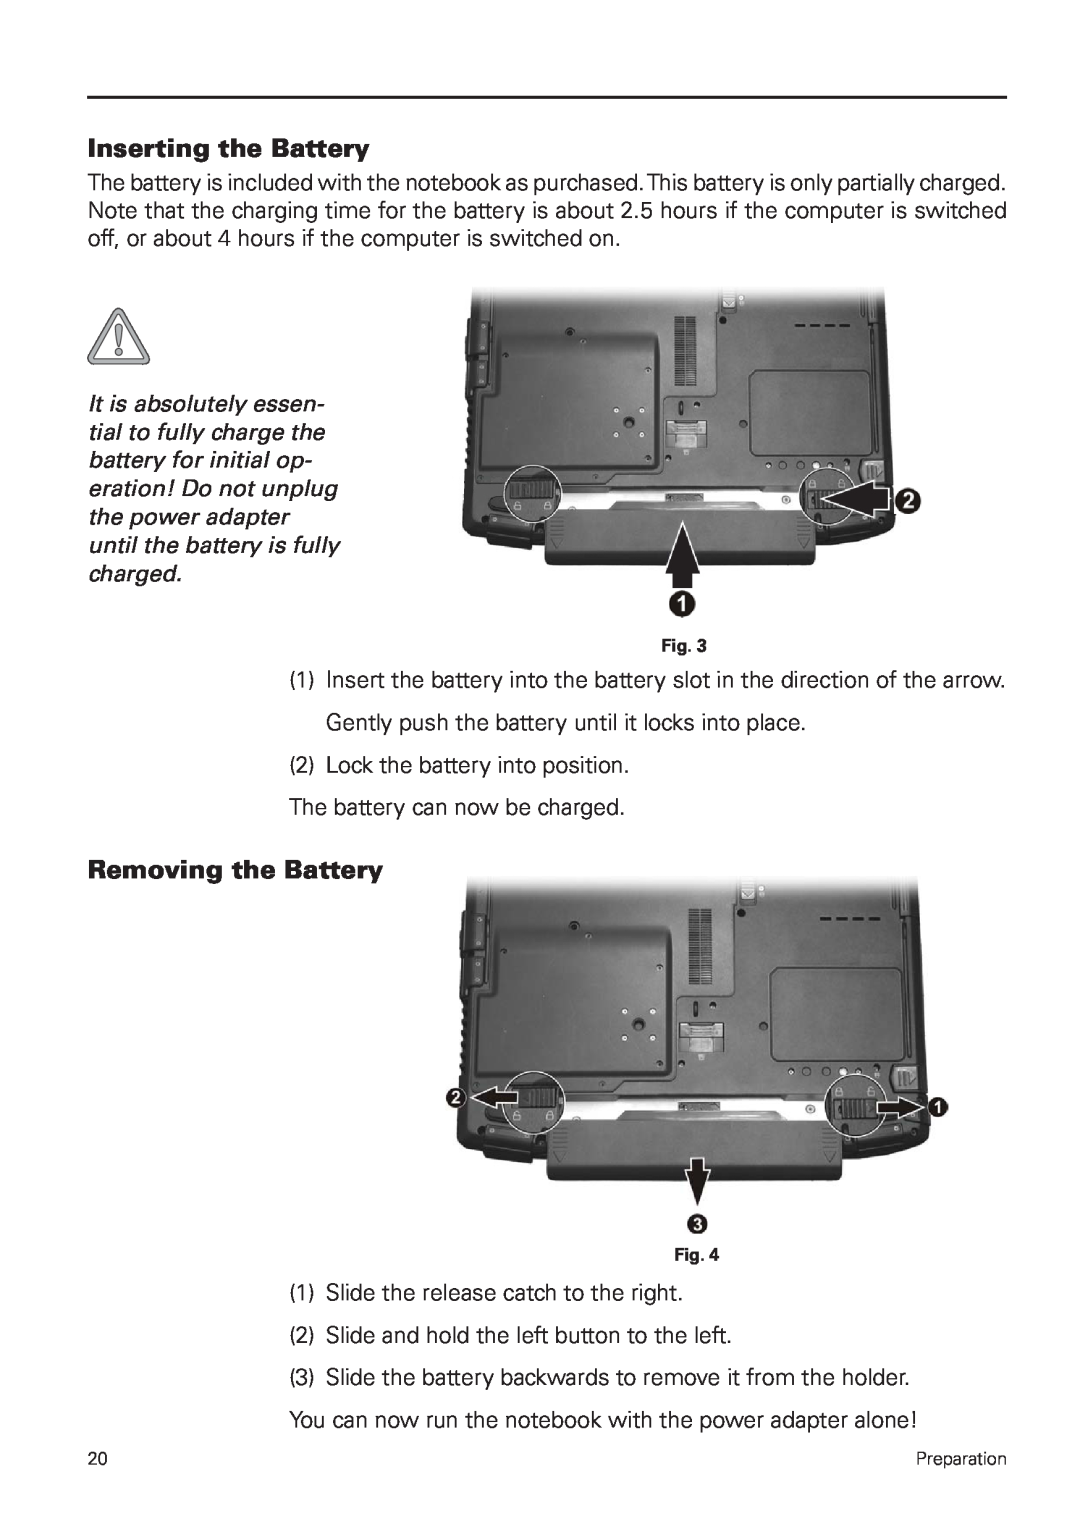 MAXDATA 5500 IR user manual Inserting the Battery, Removing the Battery 